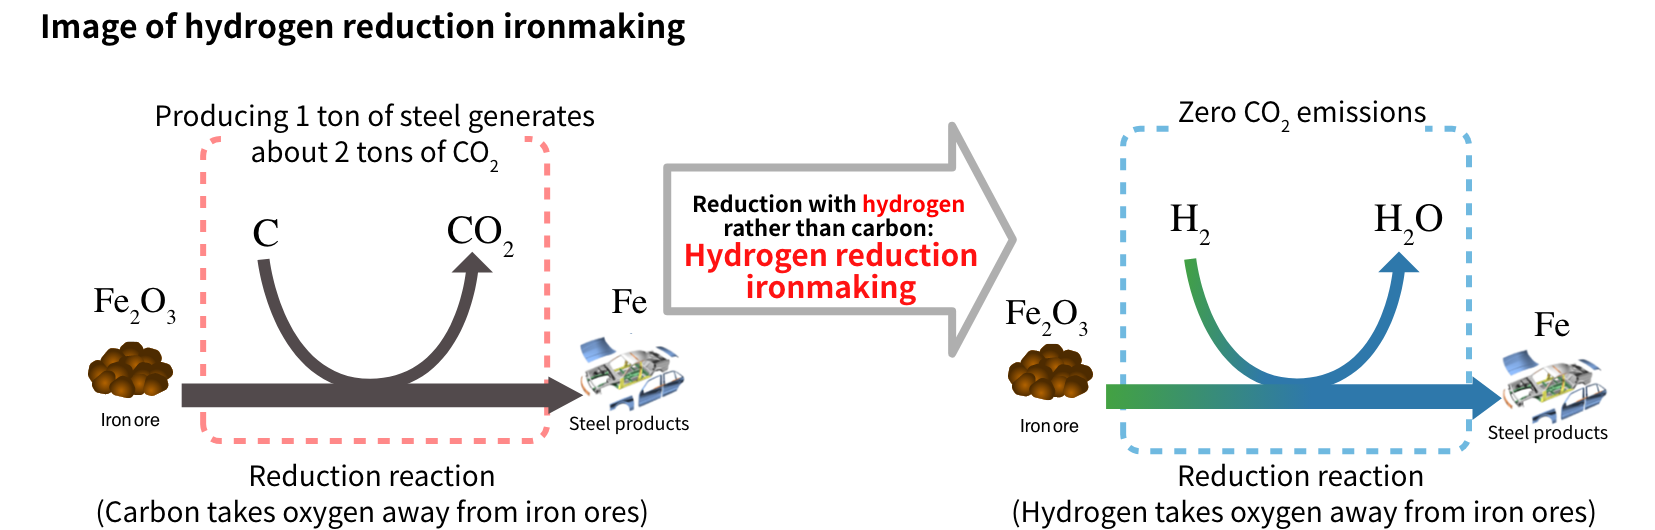 Hydrogen Utilization in Iron and Steelmaking Processes